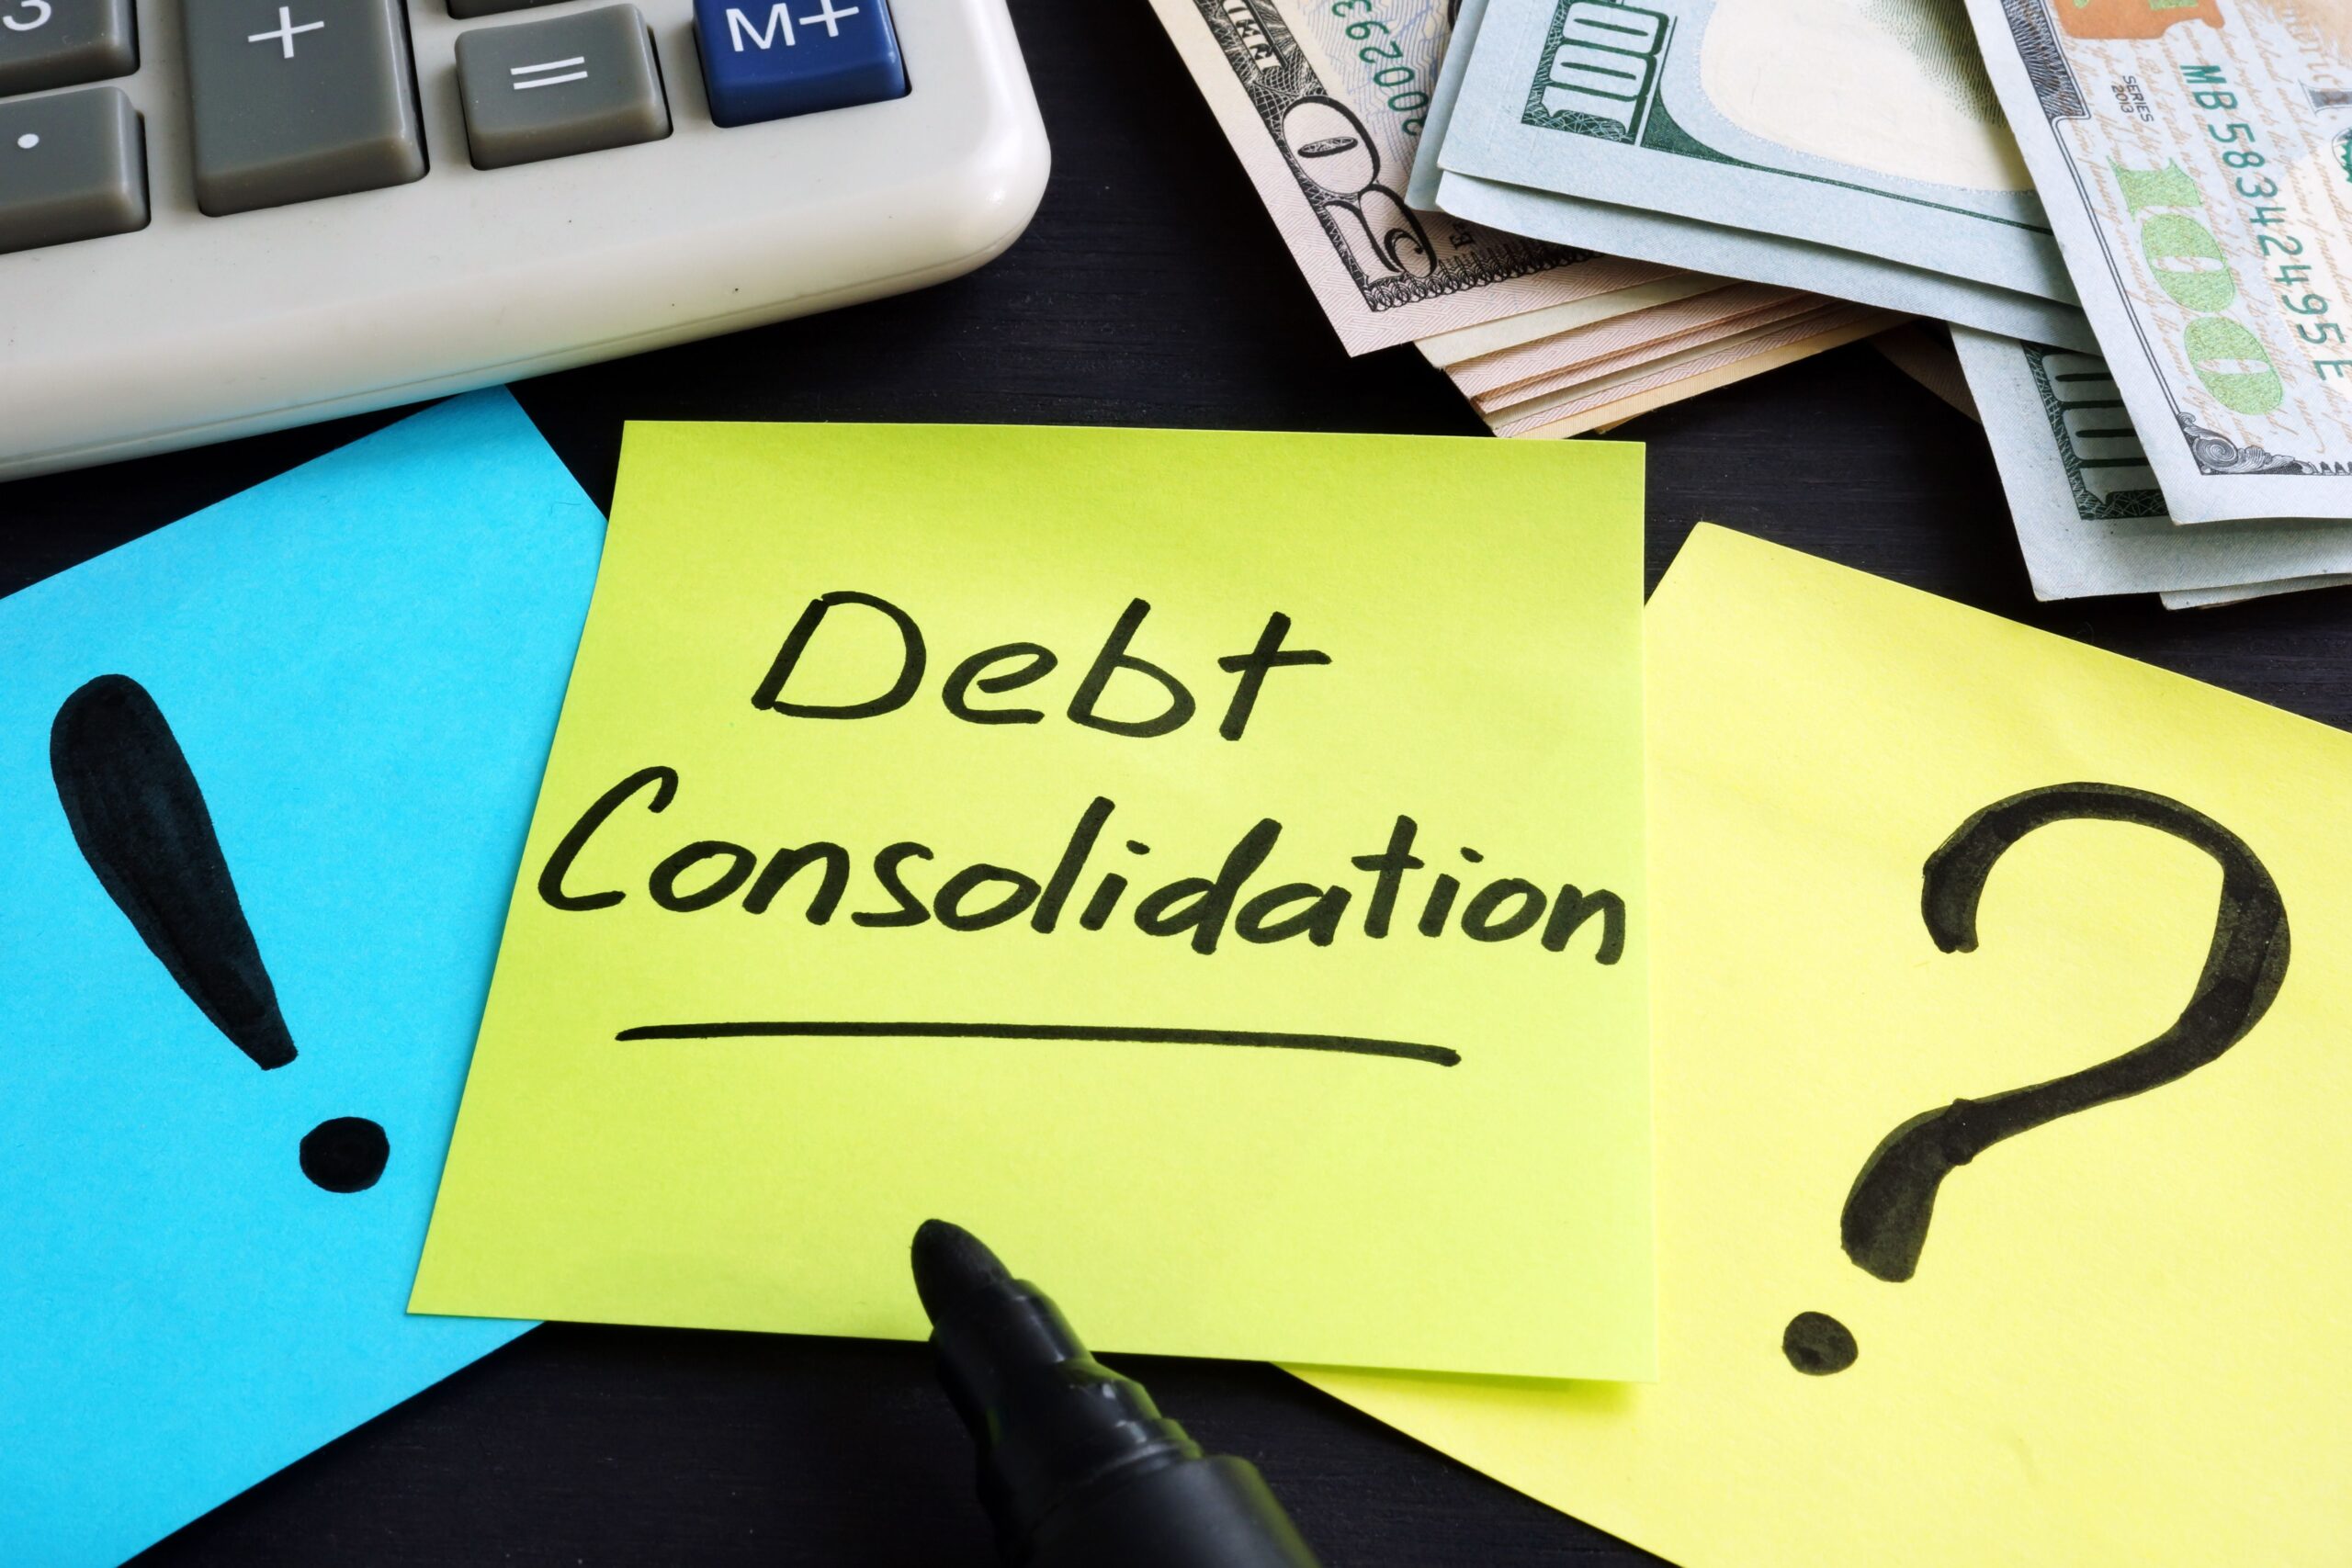 What is Debt Consolidation?